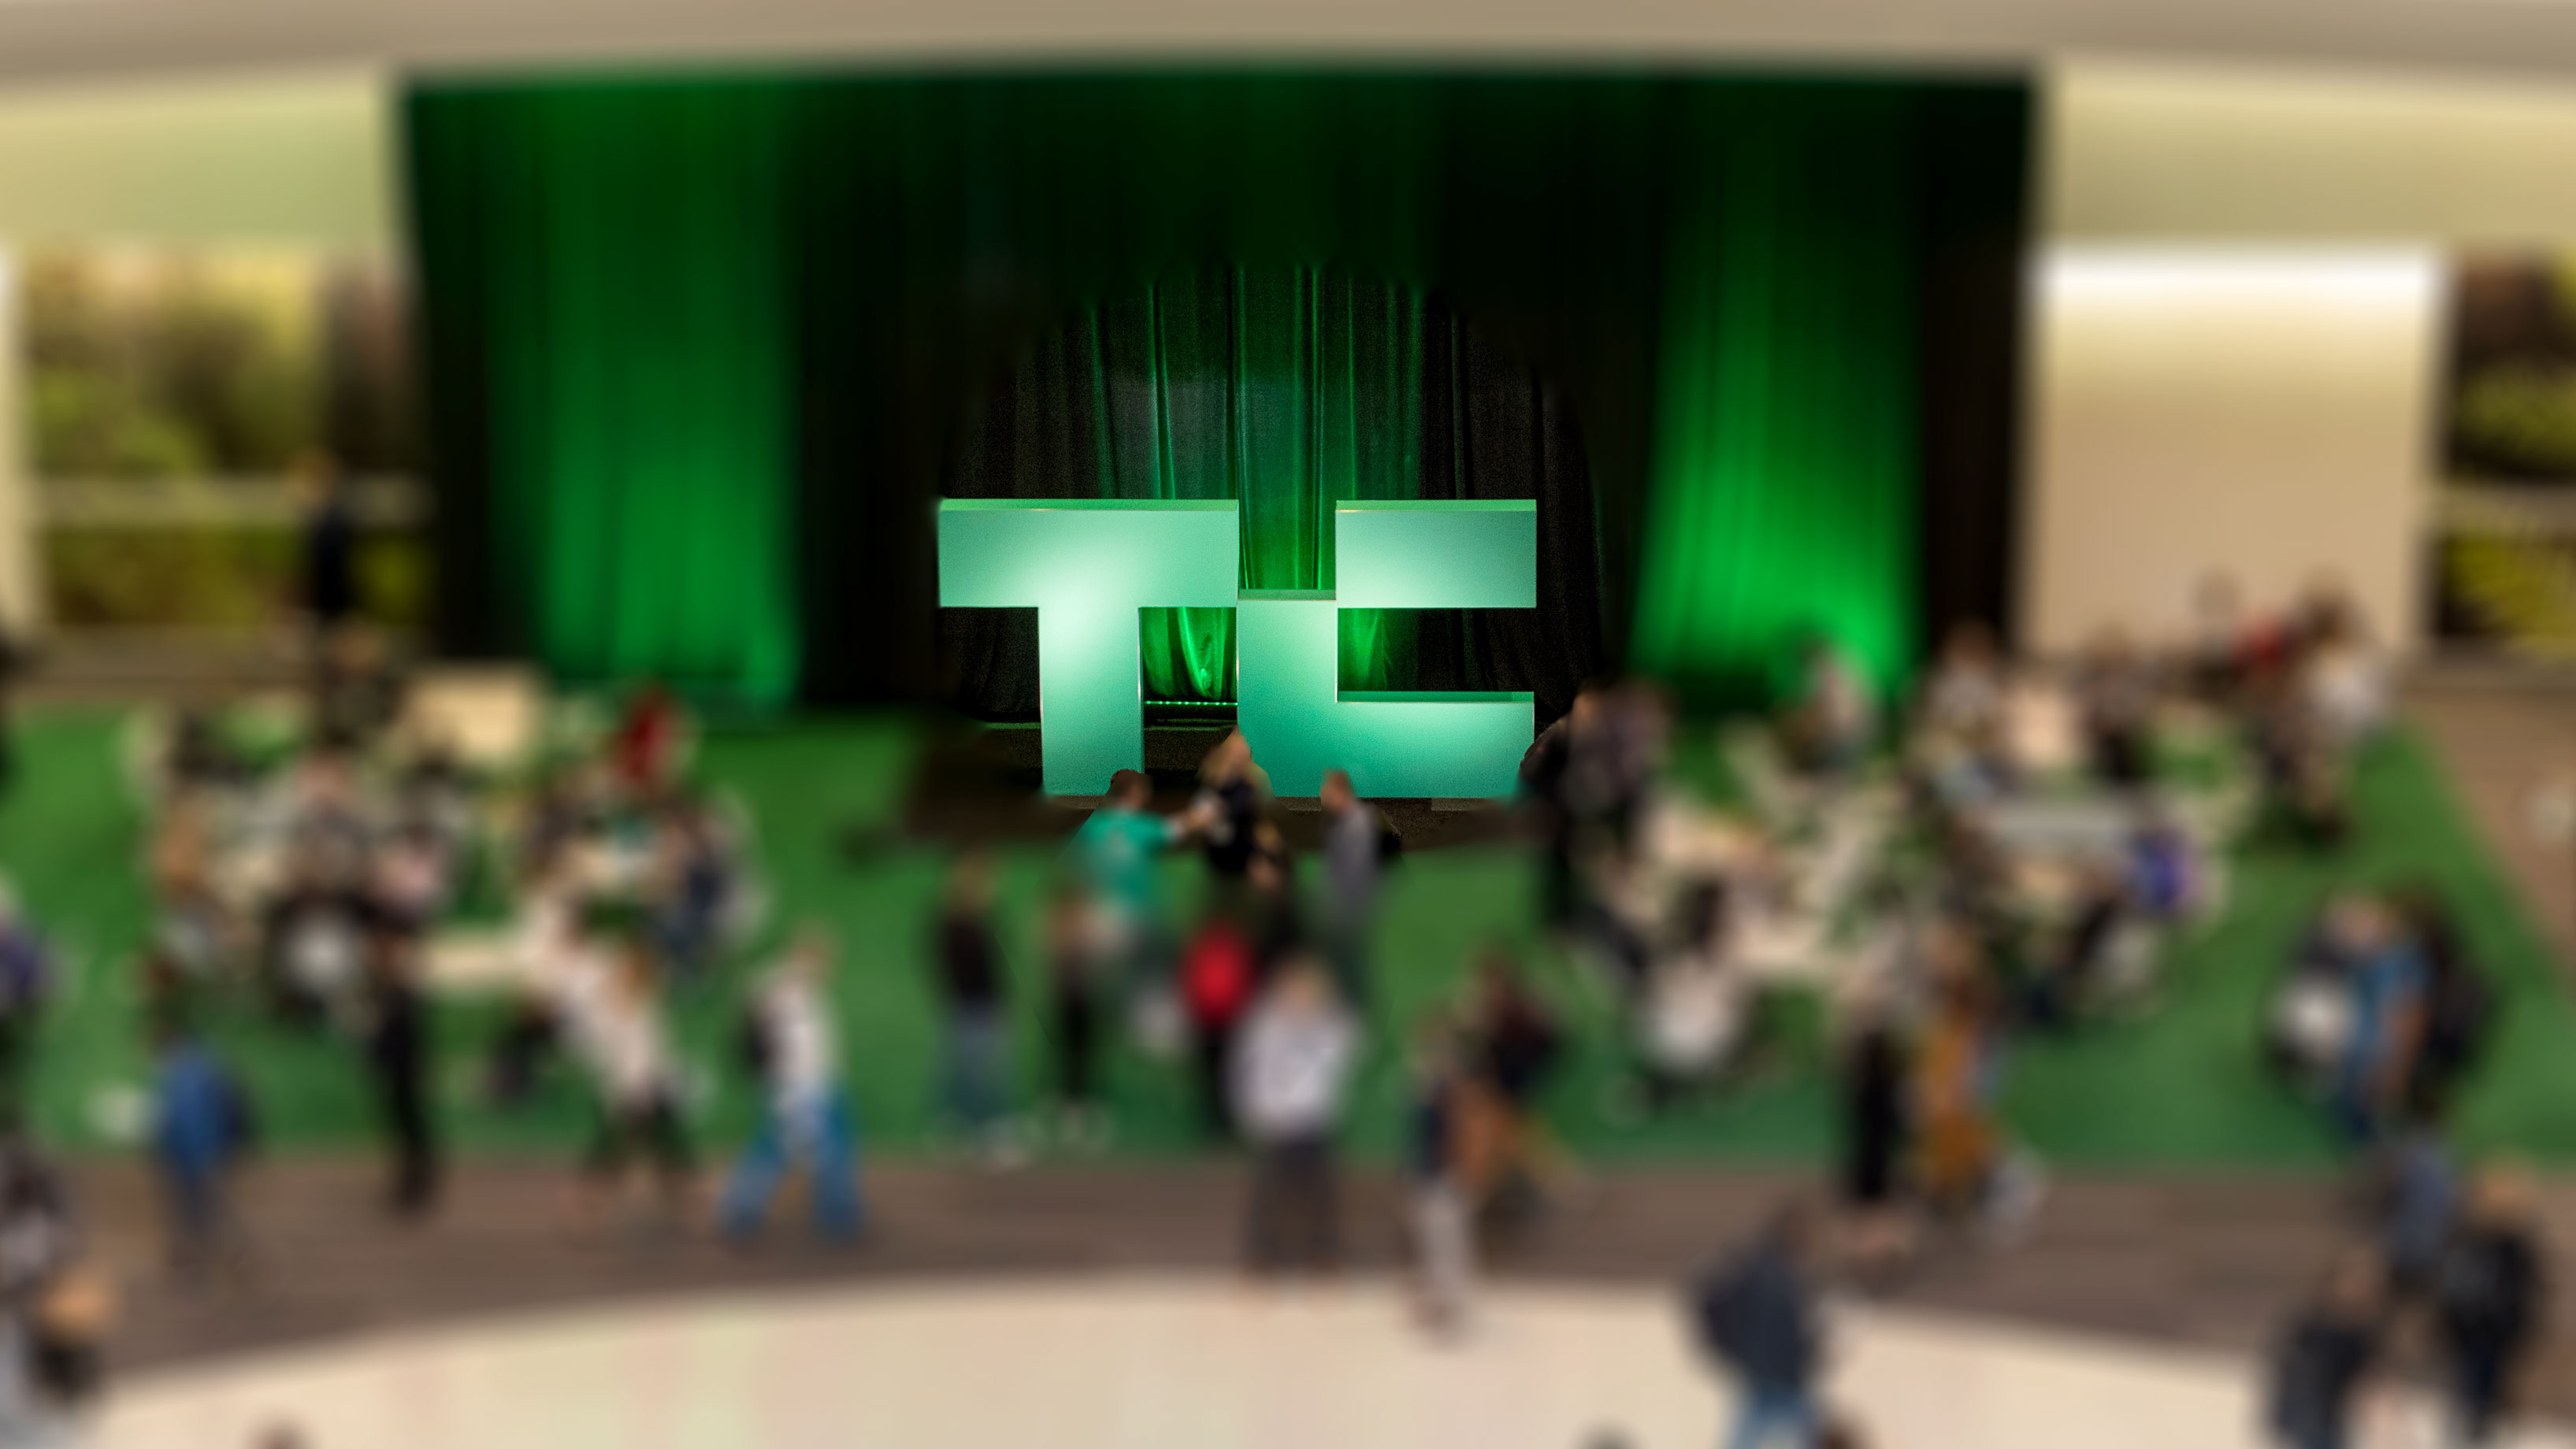 TechCrunch in a crowd at Moscone West in San Francisco